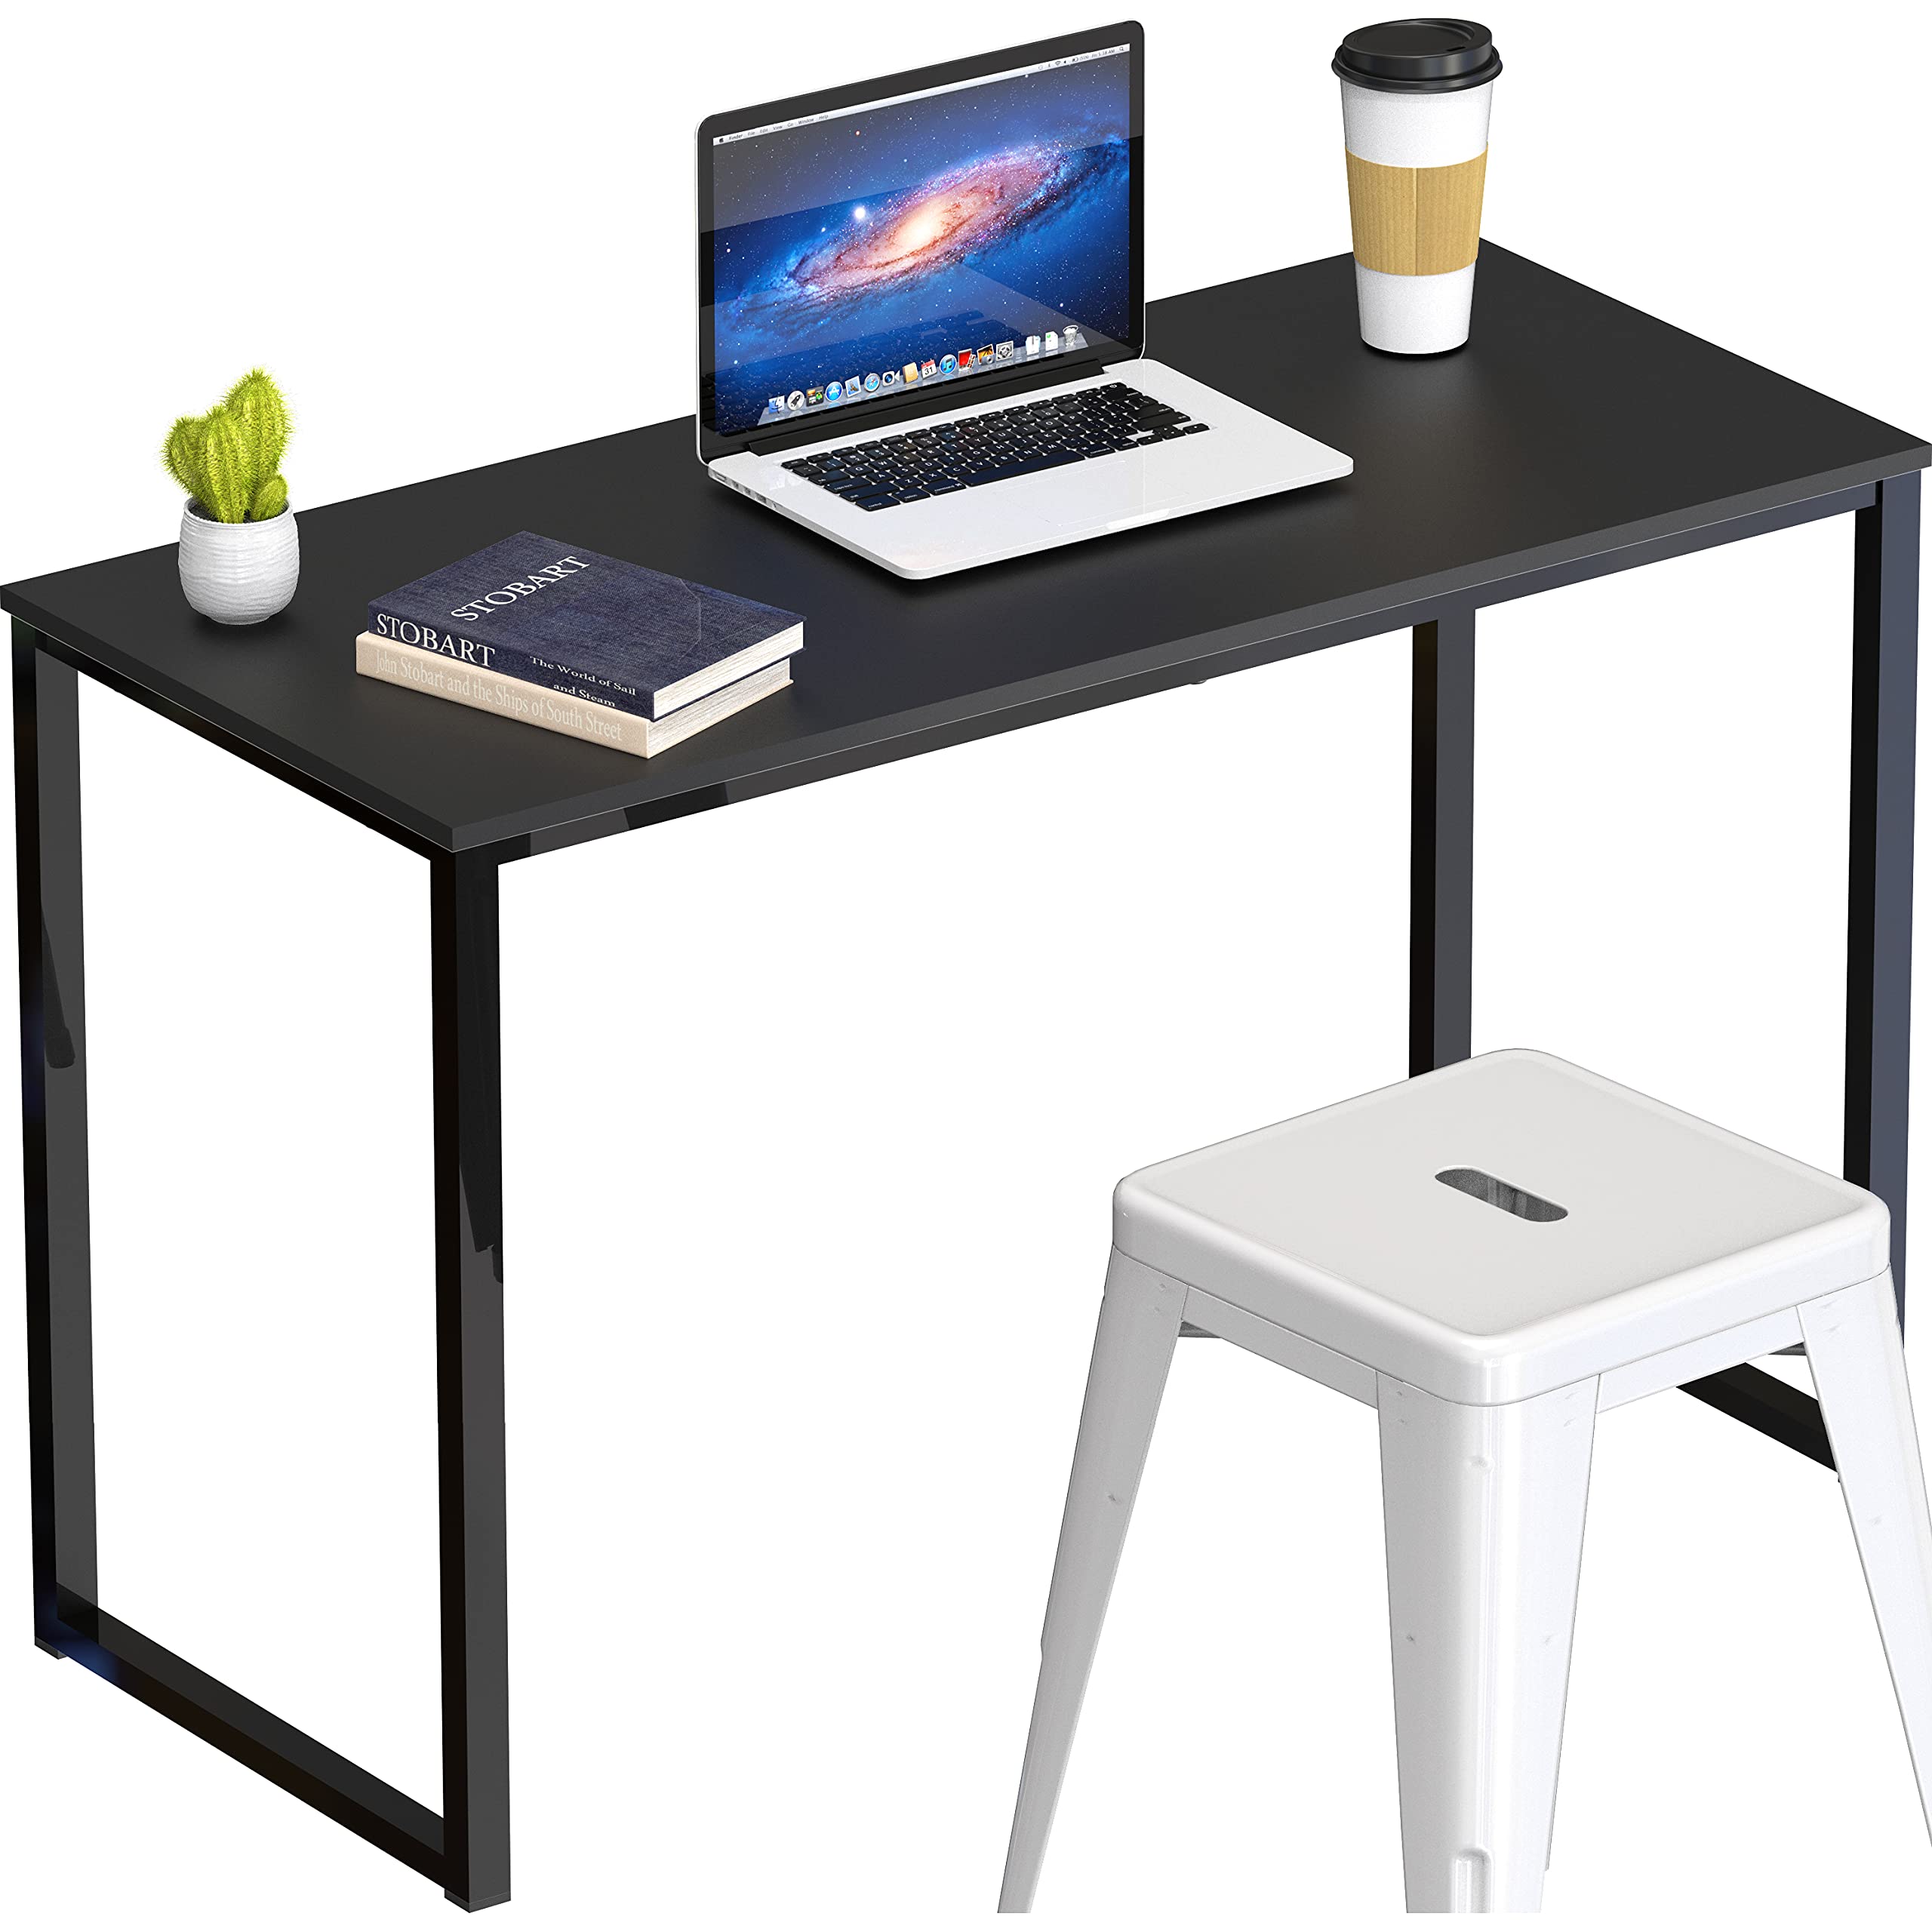 SHW Mission 32 inches office desk, Black - image 3 of 5